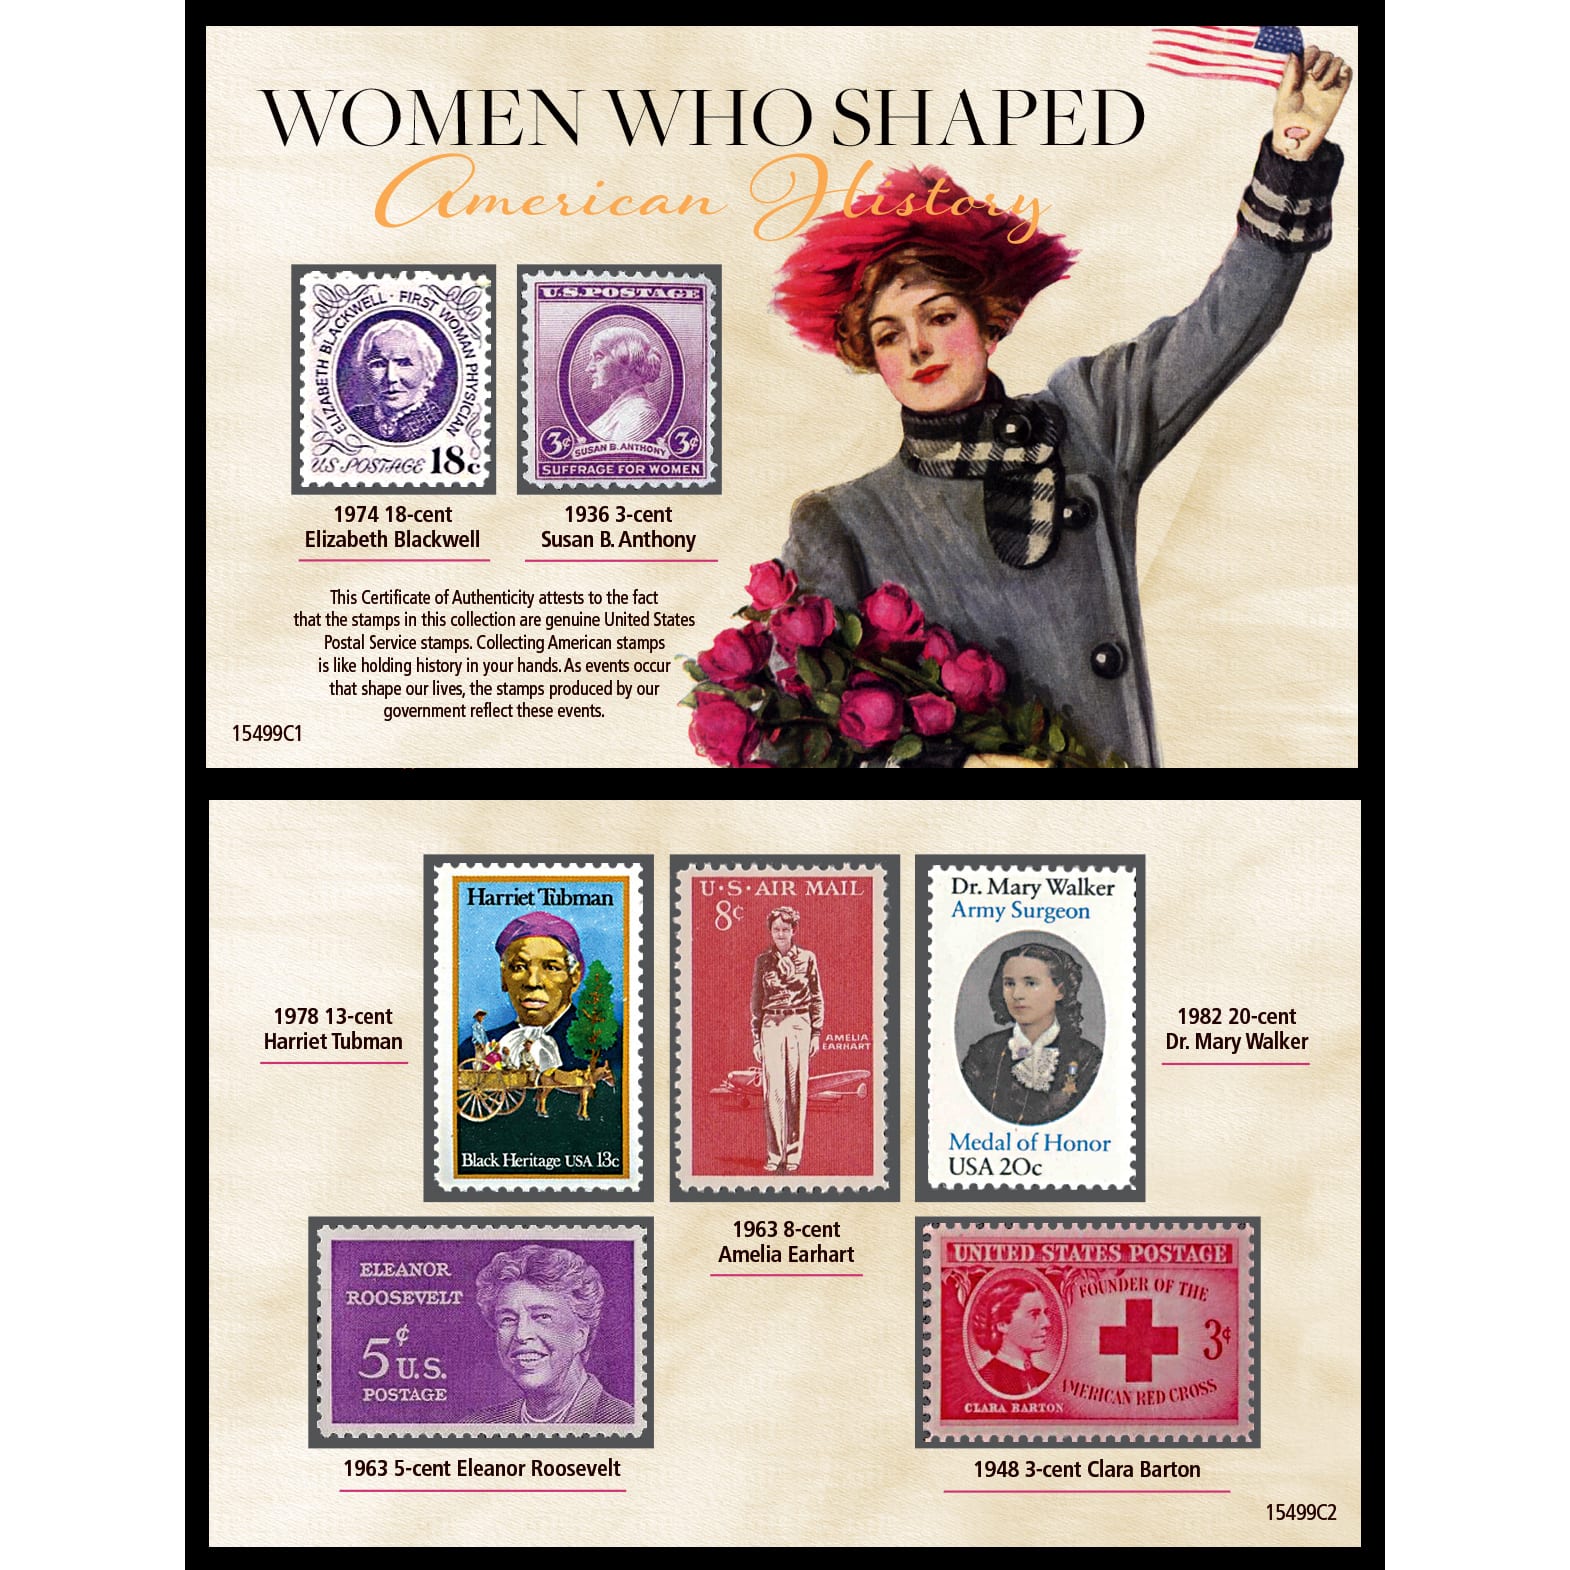 Women Who Shaped American History Postage Stamp Collection